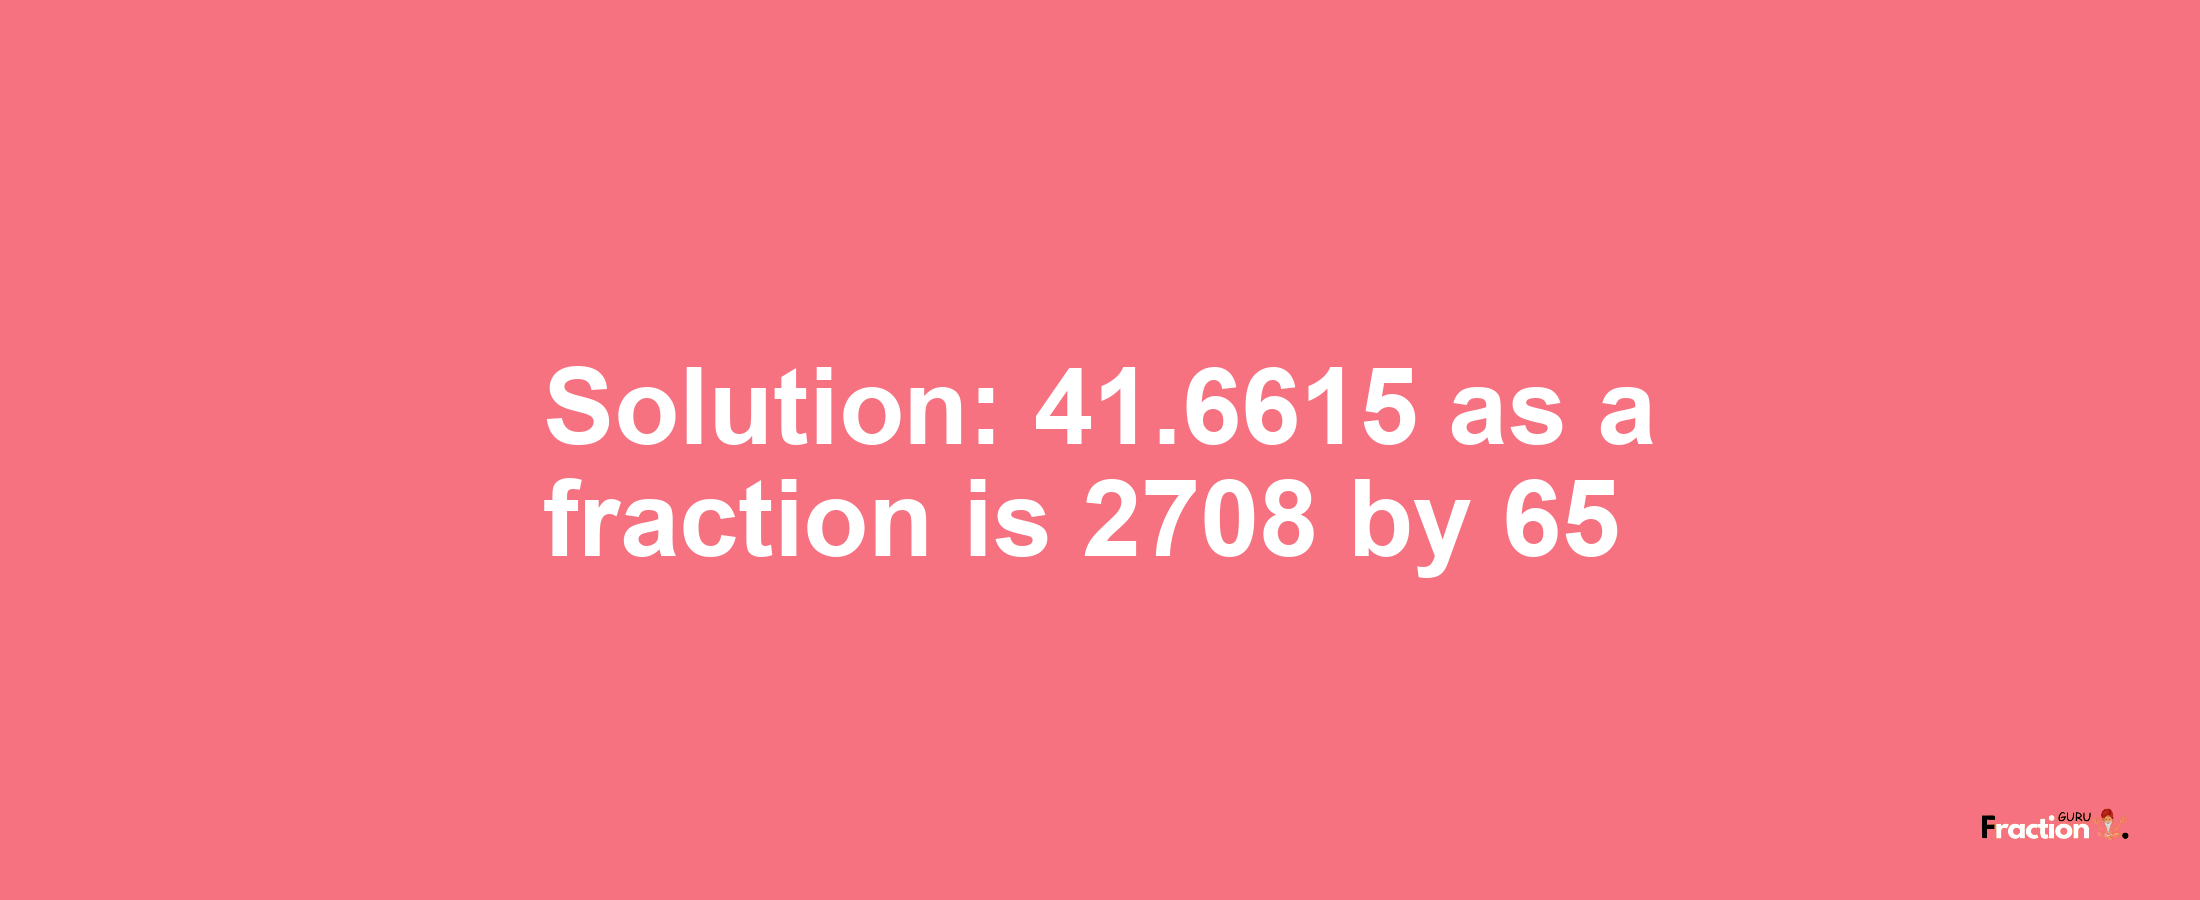 Solution:41.6615 as a fraction is 2708/65